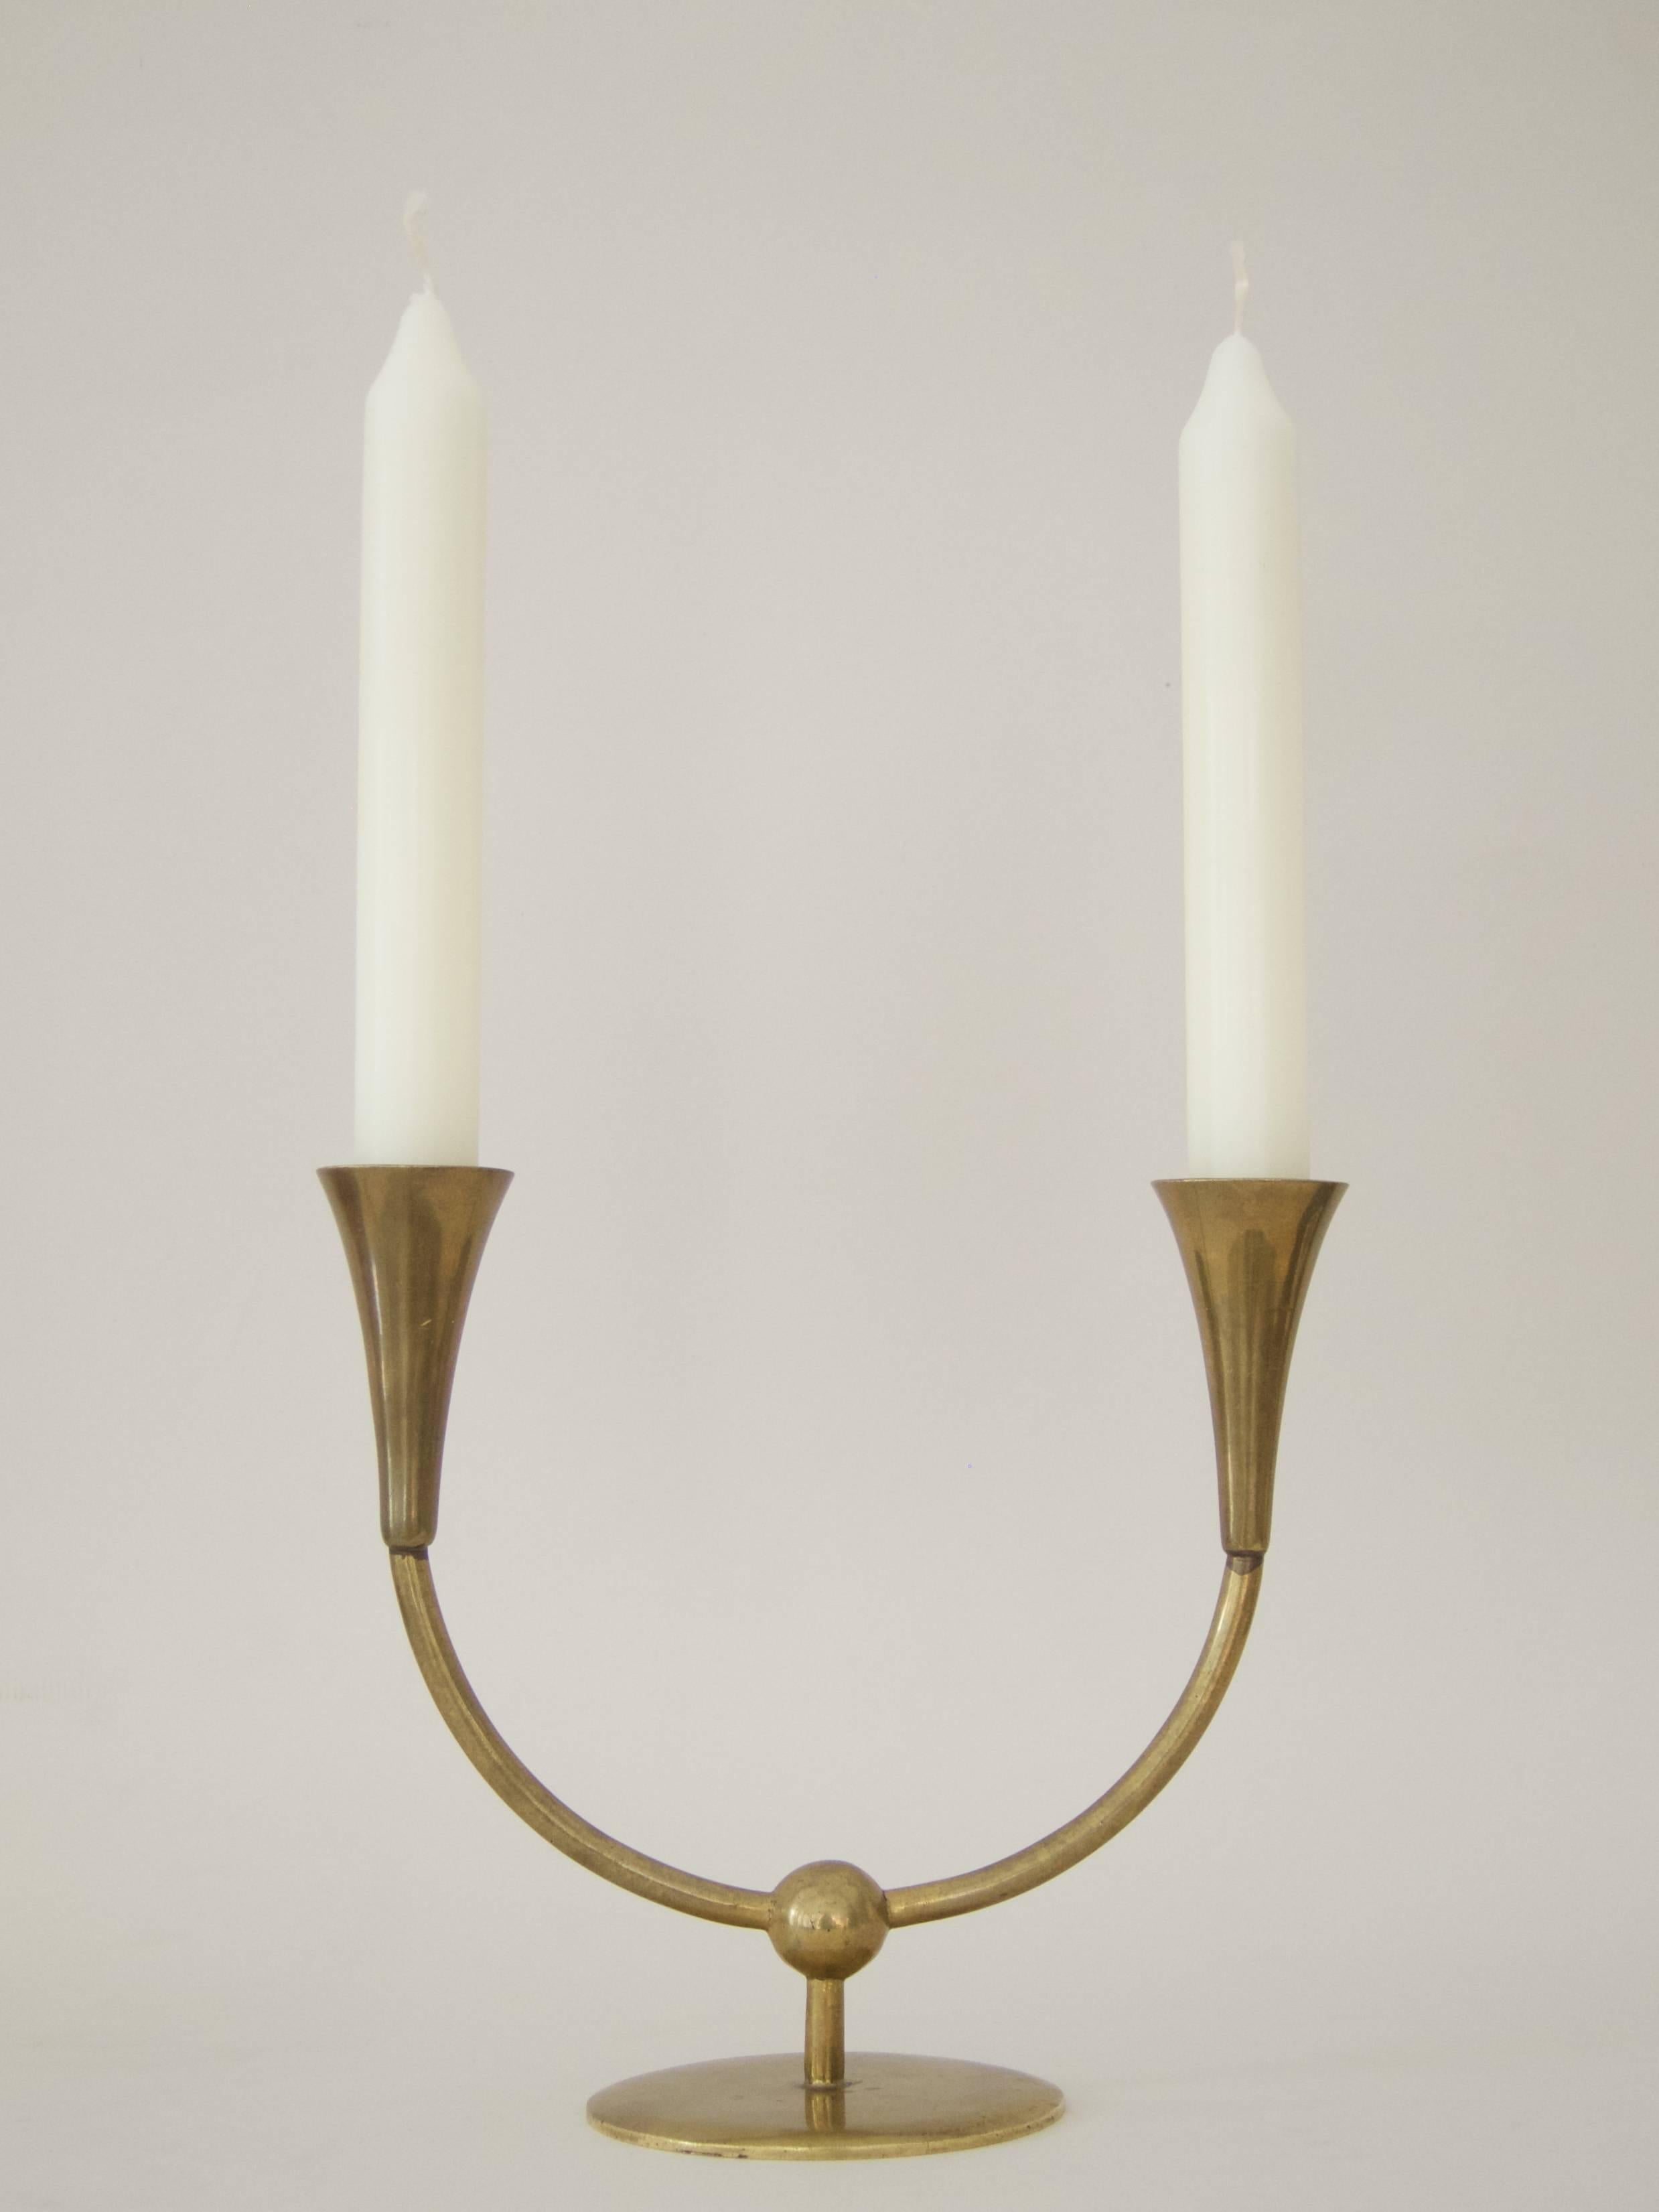 Pair of Two-Arm Candleholders by Richard Rohac In Good Condition For Sale In Vienna, AT